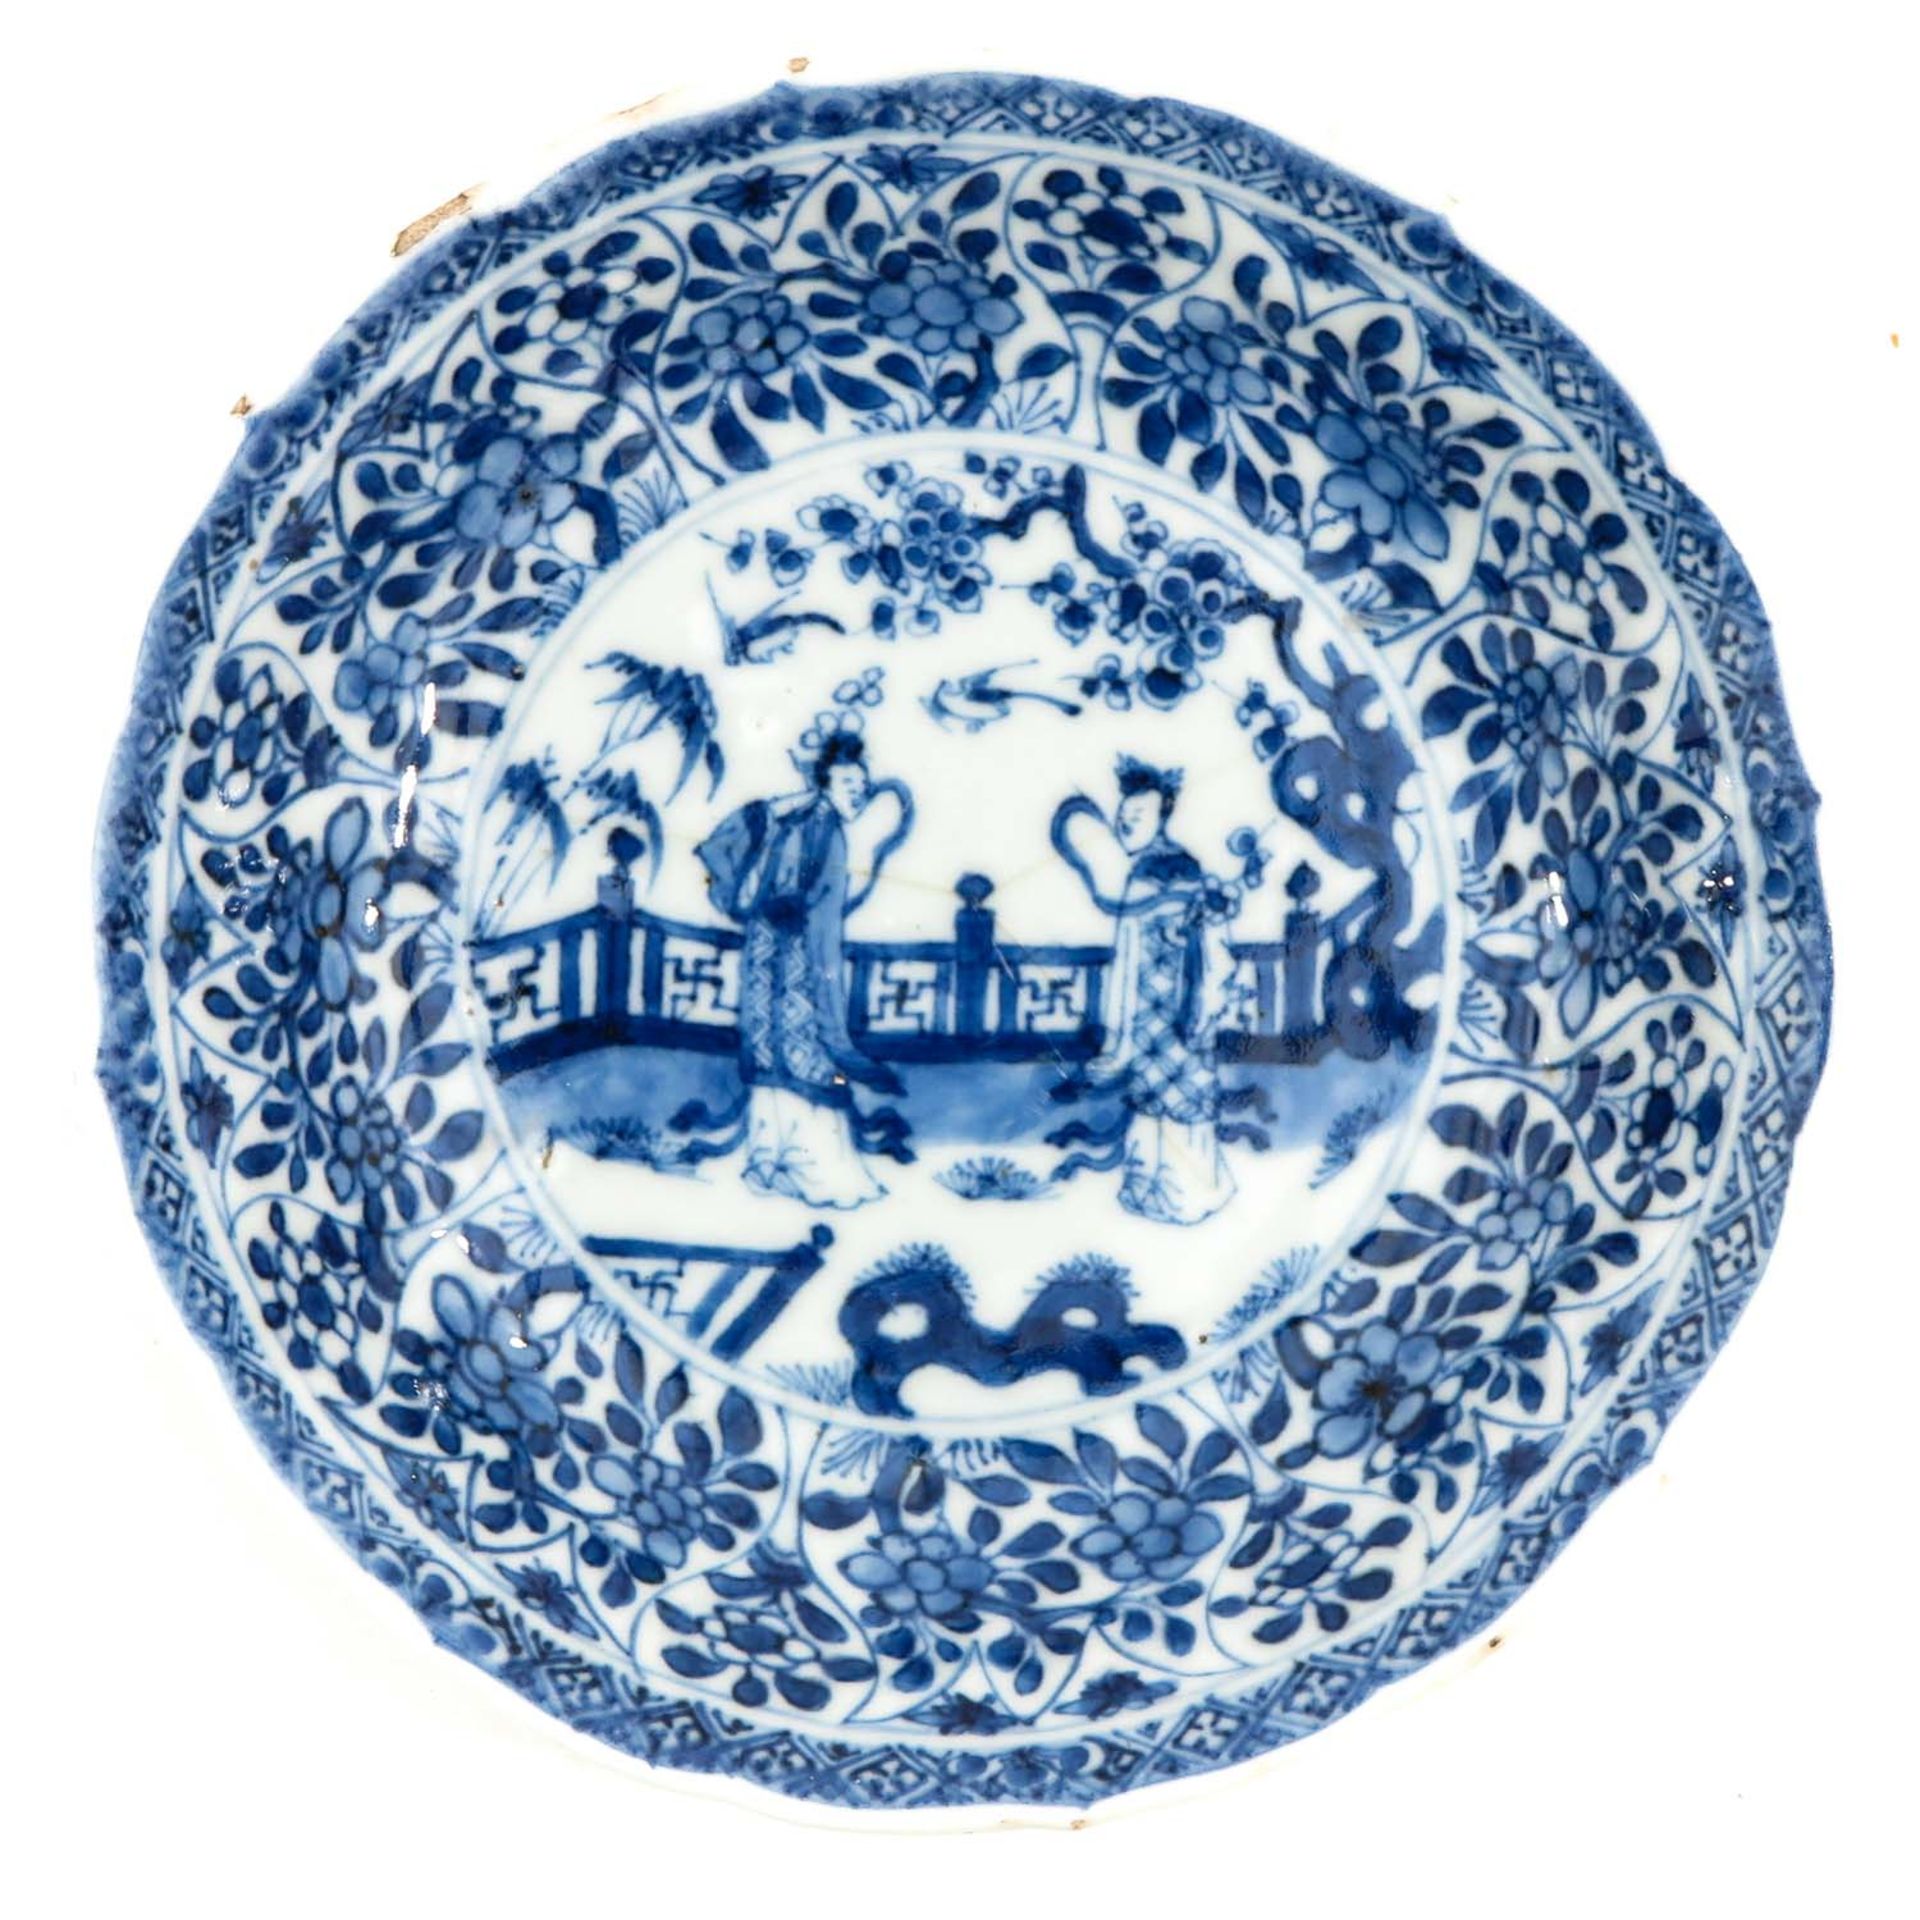 A Small Blue and White Plate